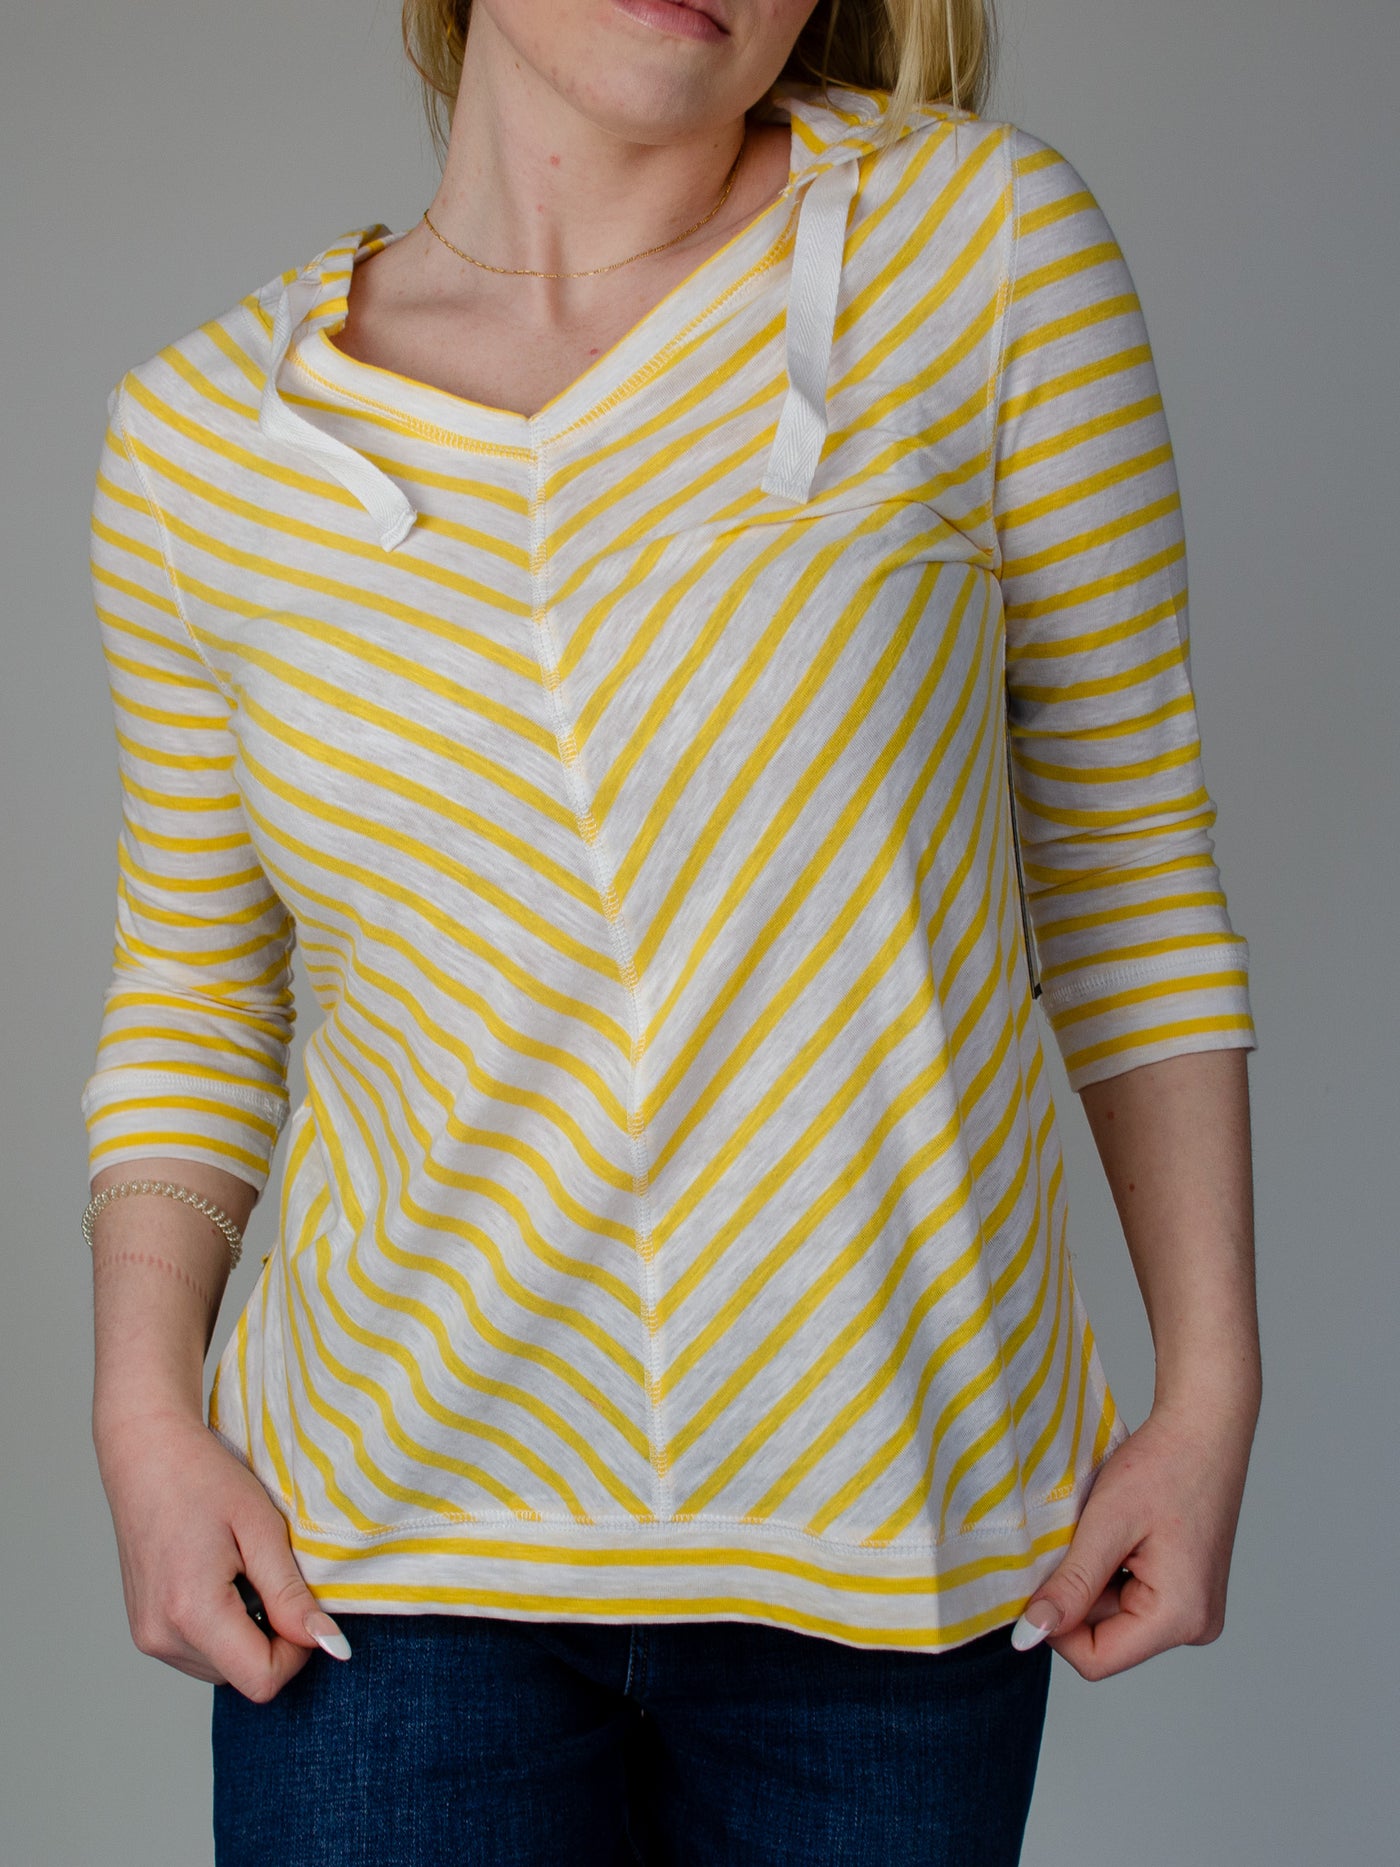 Model is wearing a striped yellow and white quarter sleeve hooded pullover with white drawstring details. Top is paired with dark wash blue jeans.